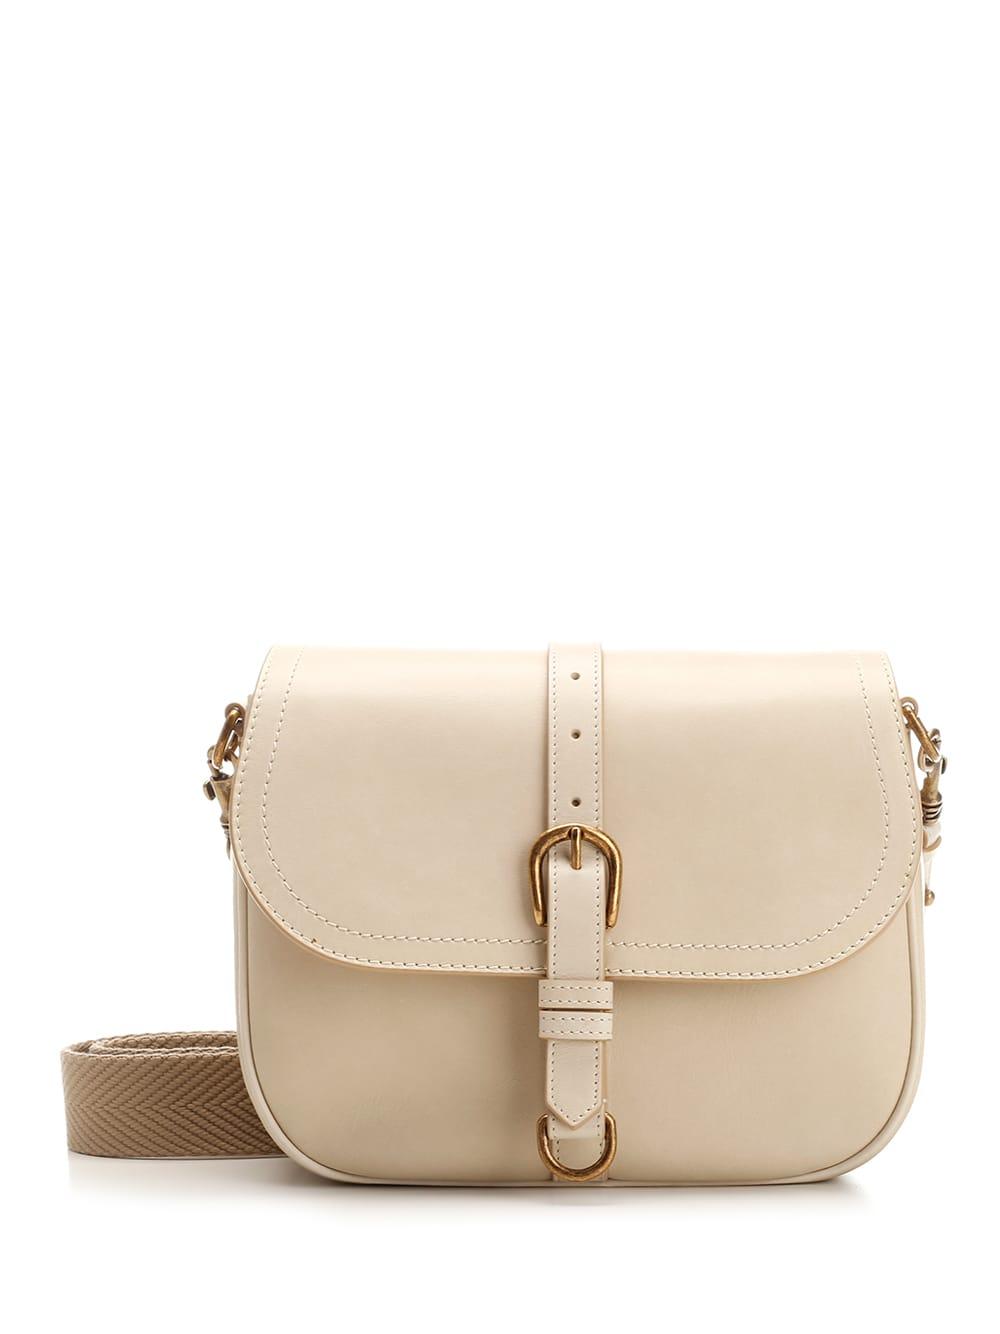 Medium Sally Bag in ash-colored suede with contrasting buckle and shoulder  strap